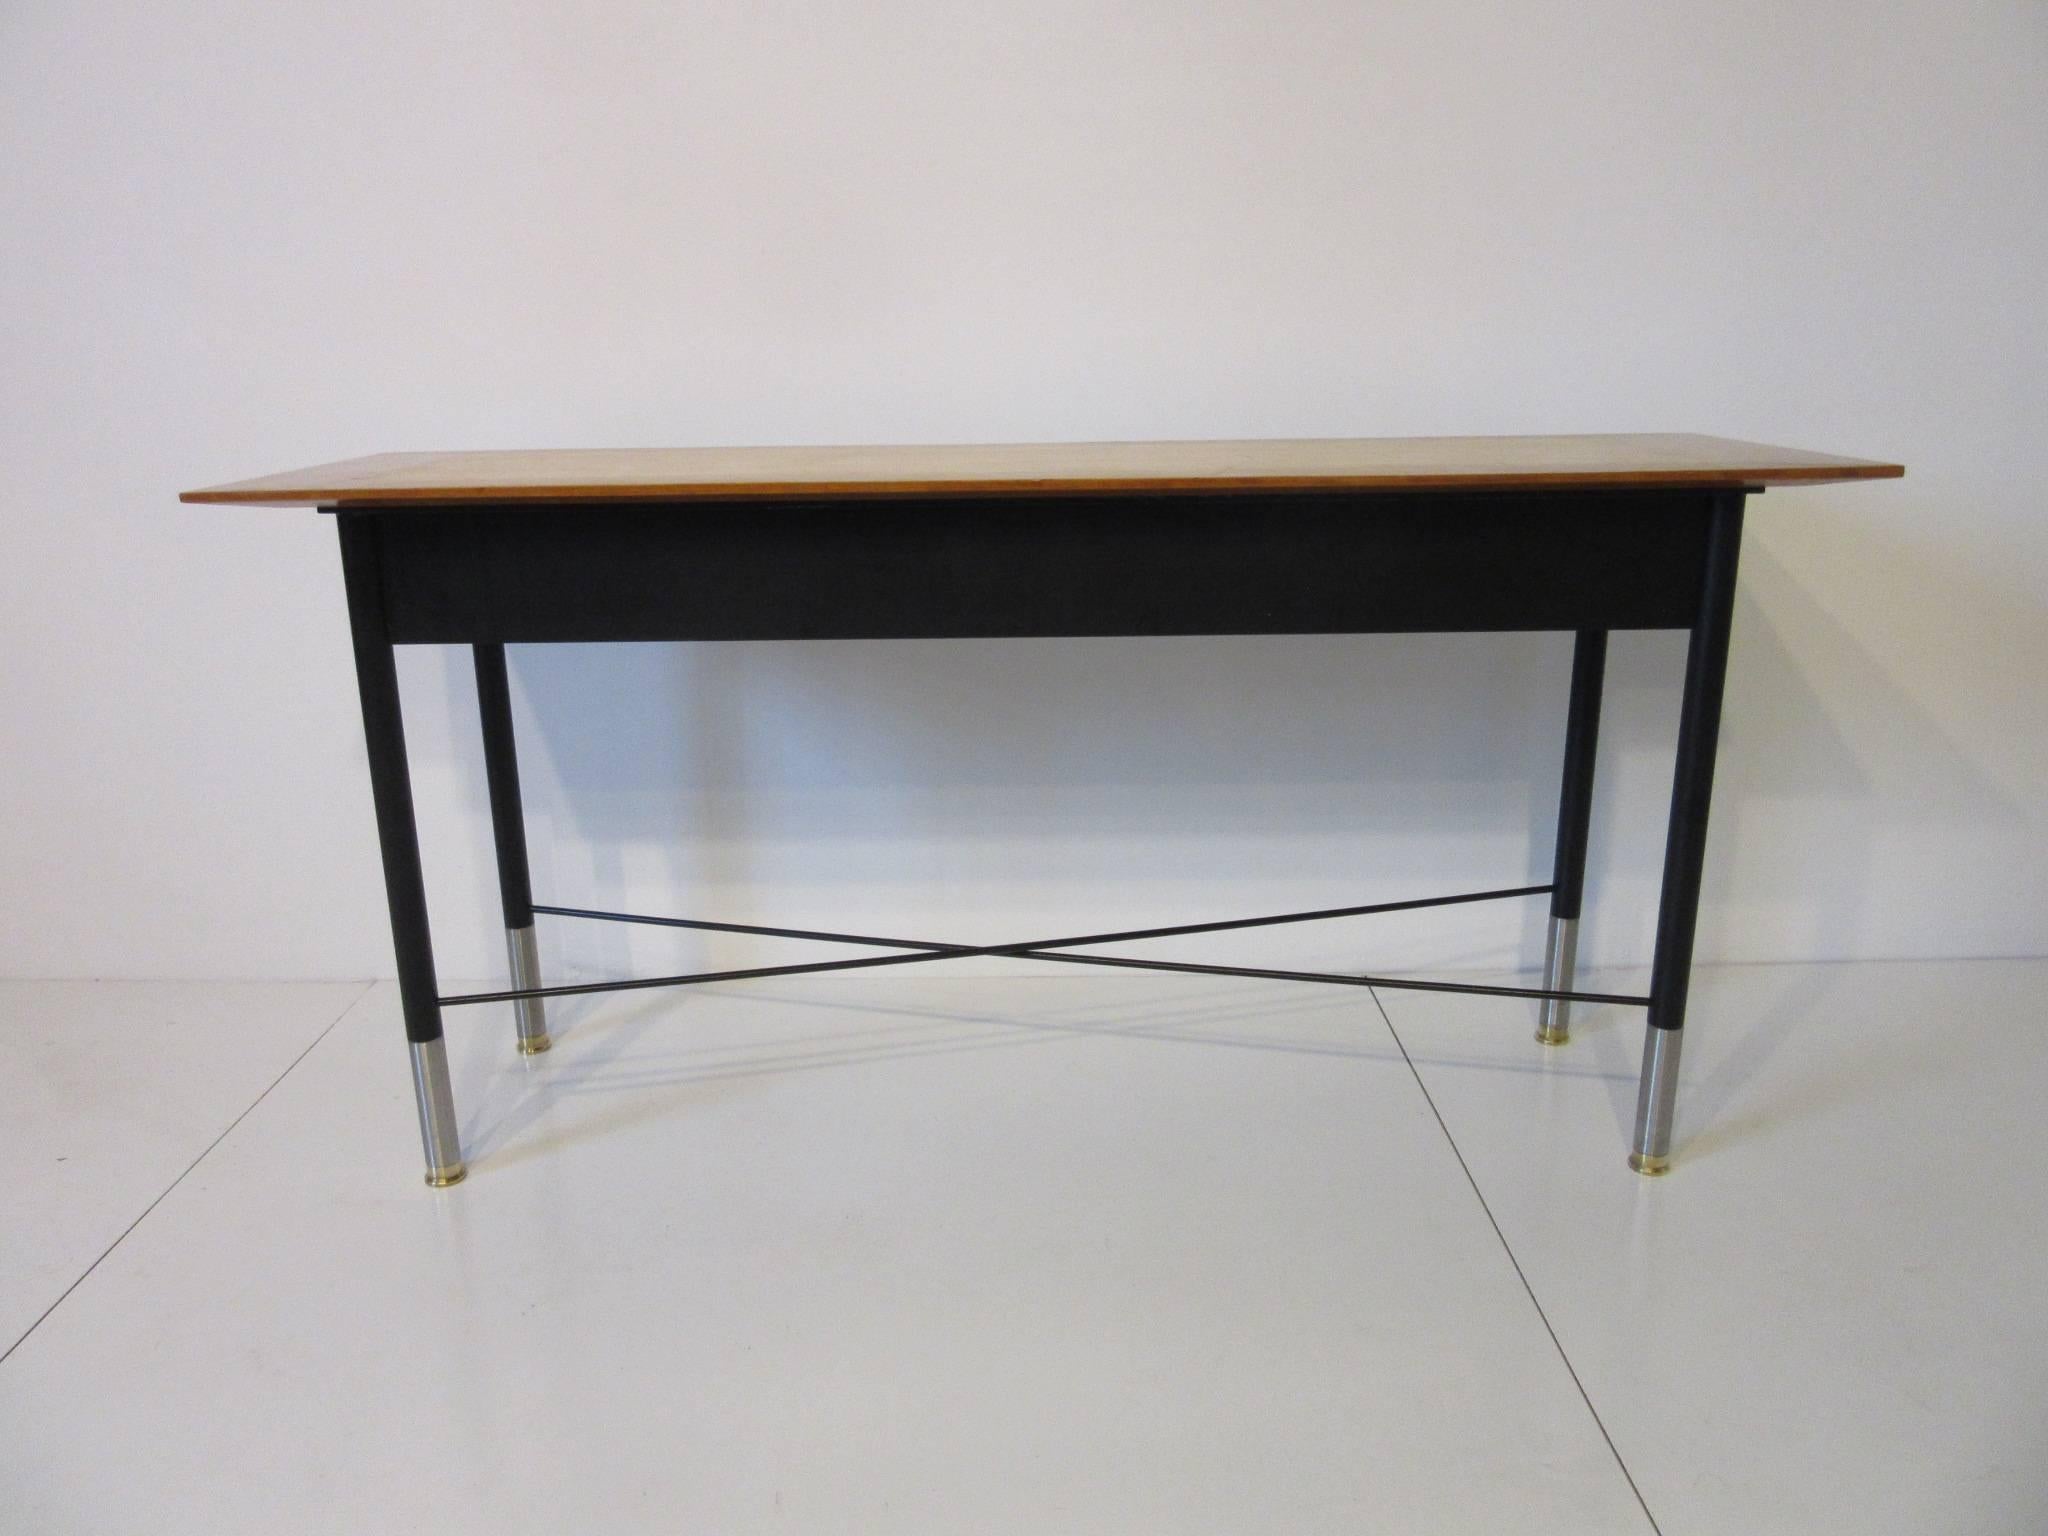 20th Century Maple Wood and Metal Console Table by Mark Goetz for Brickel